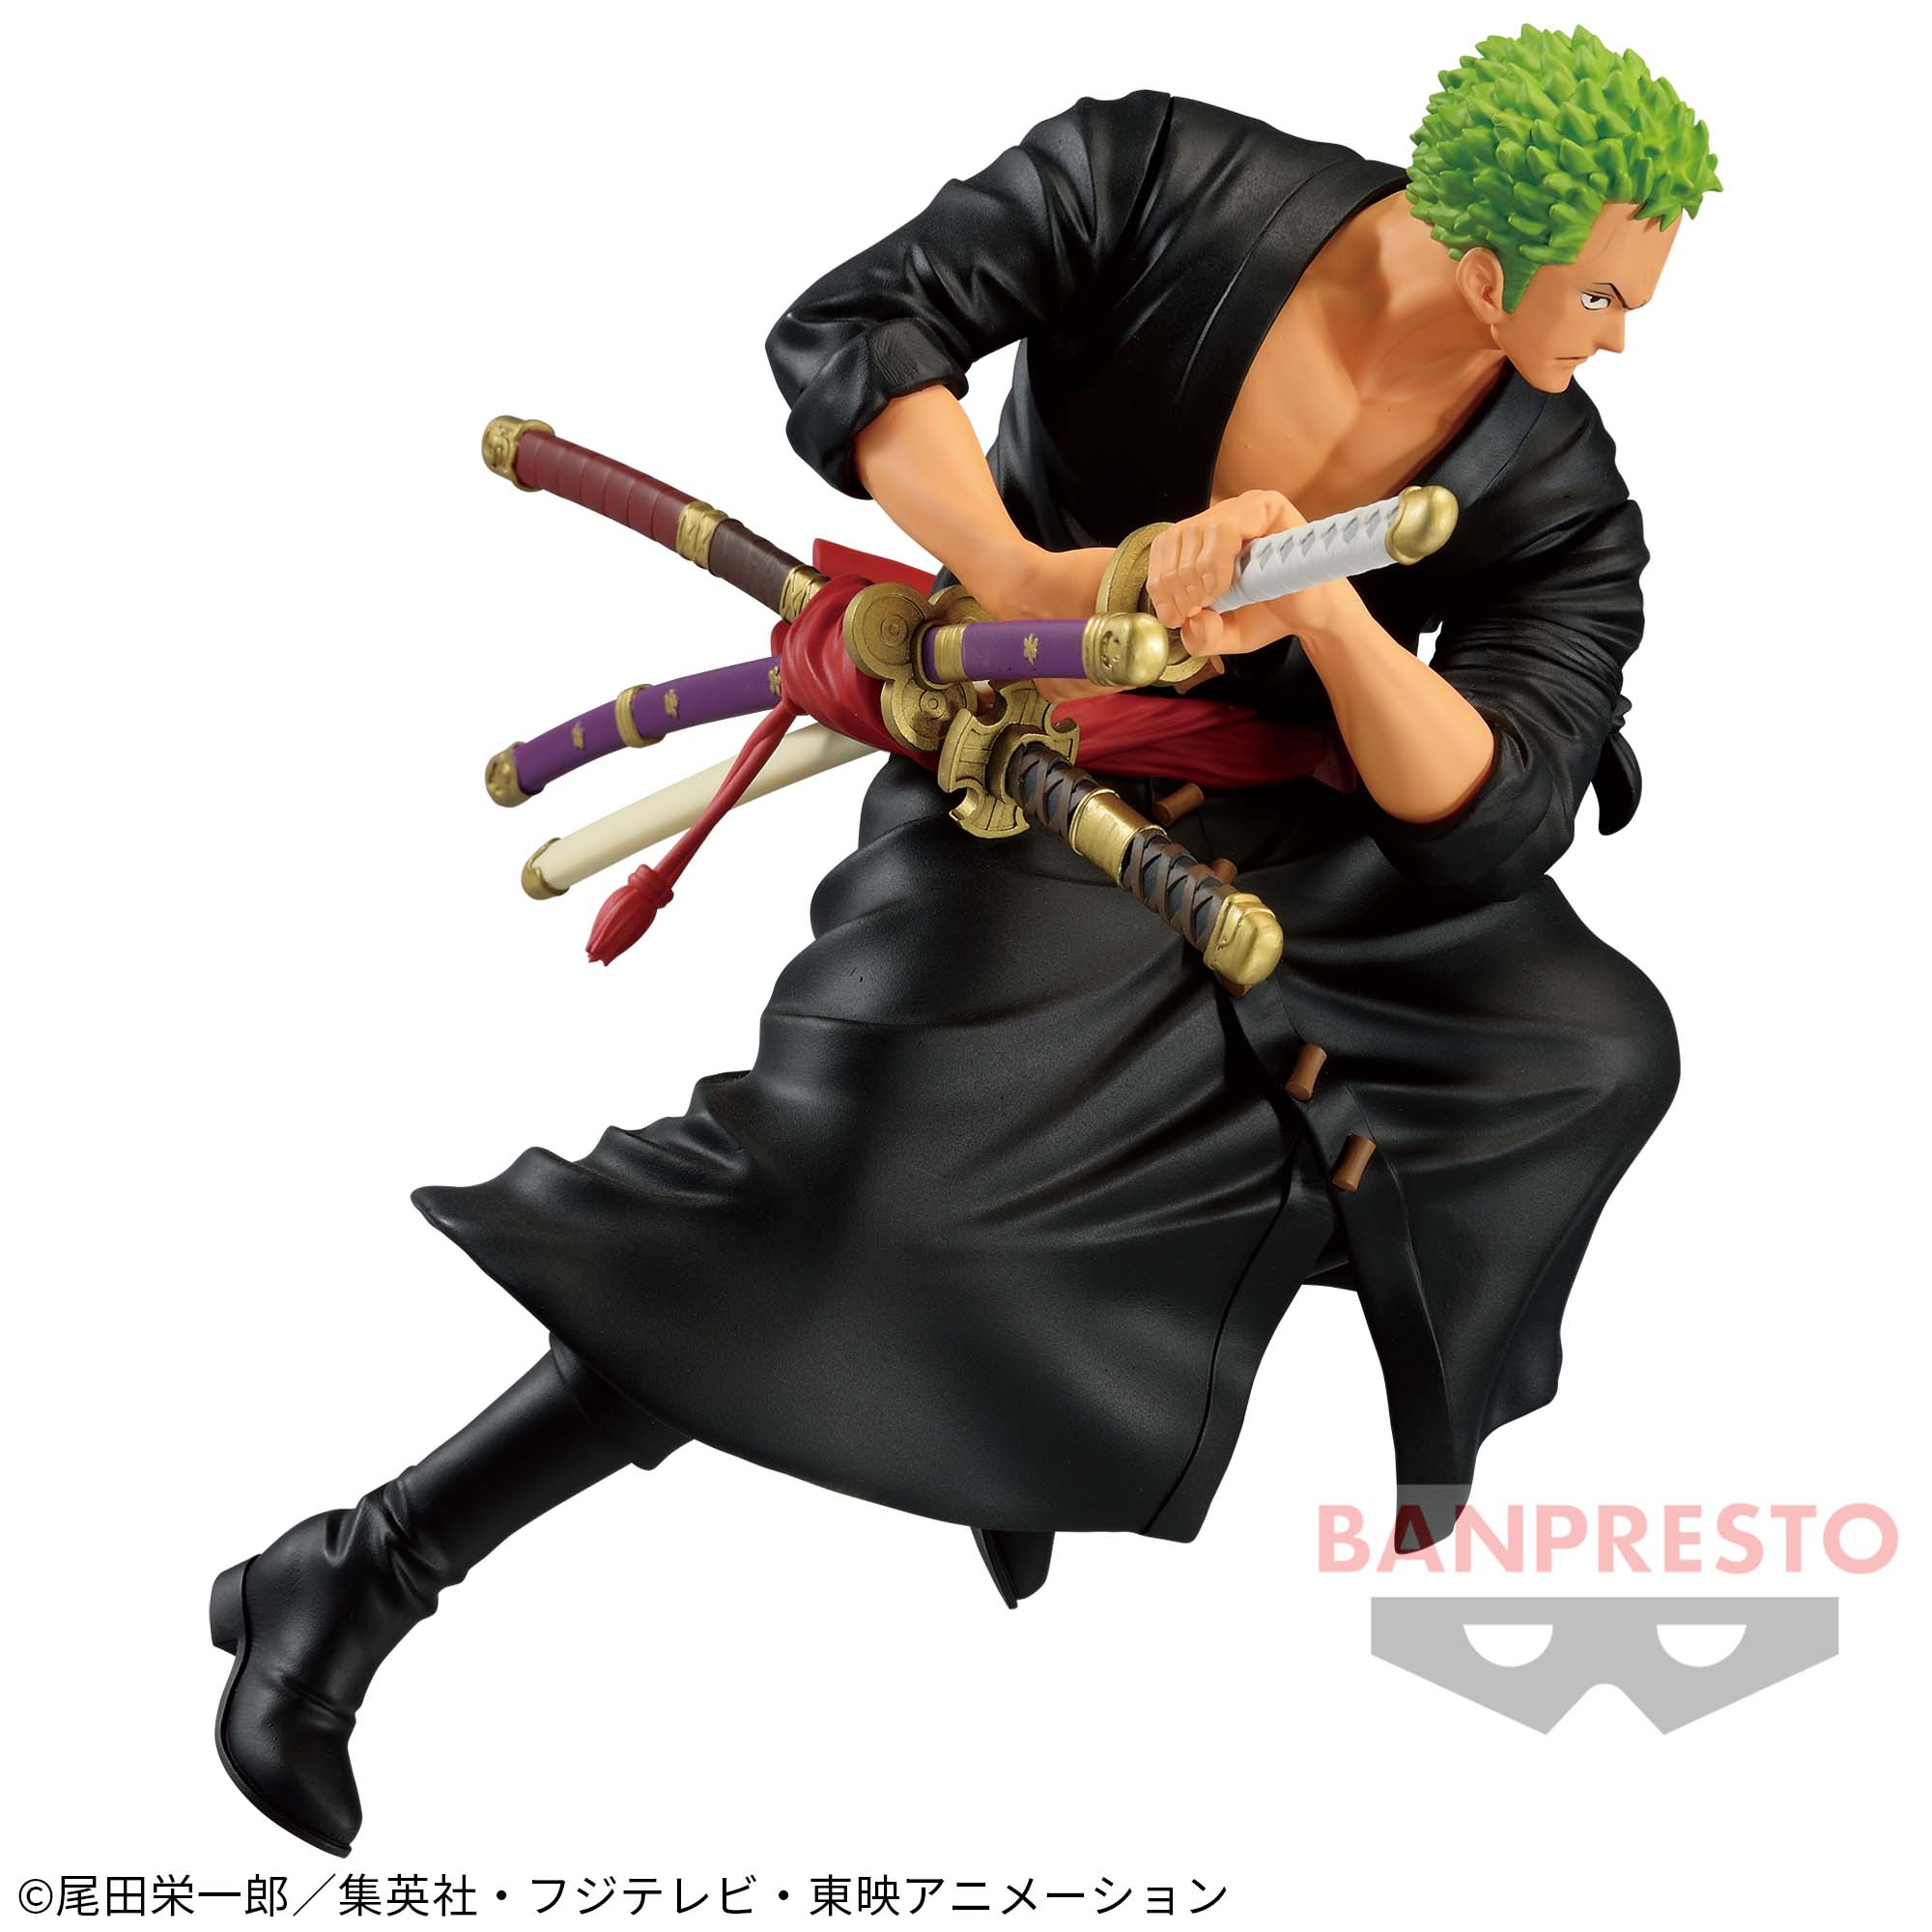 One Piece Battle Record Collection Roronoa Zoro Figure for Sale